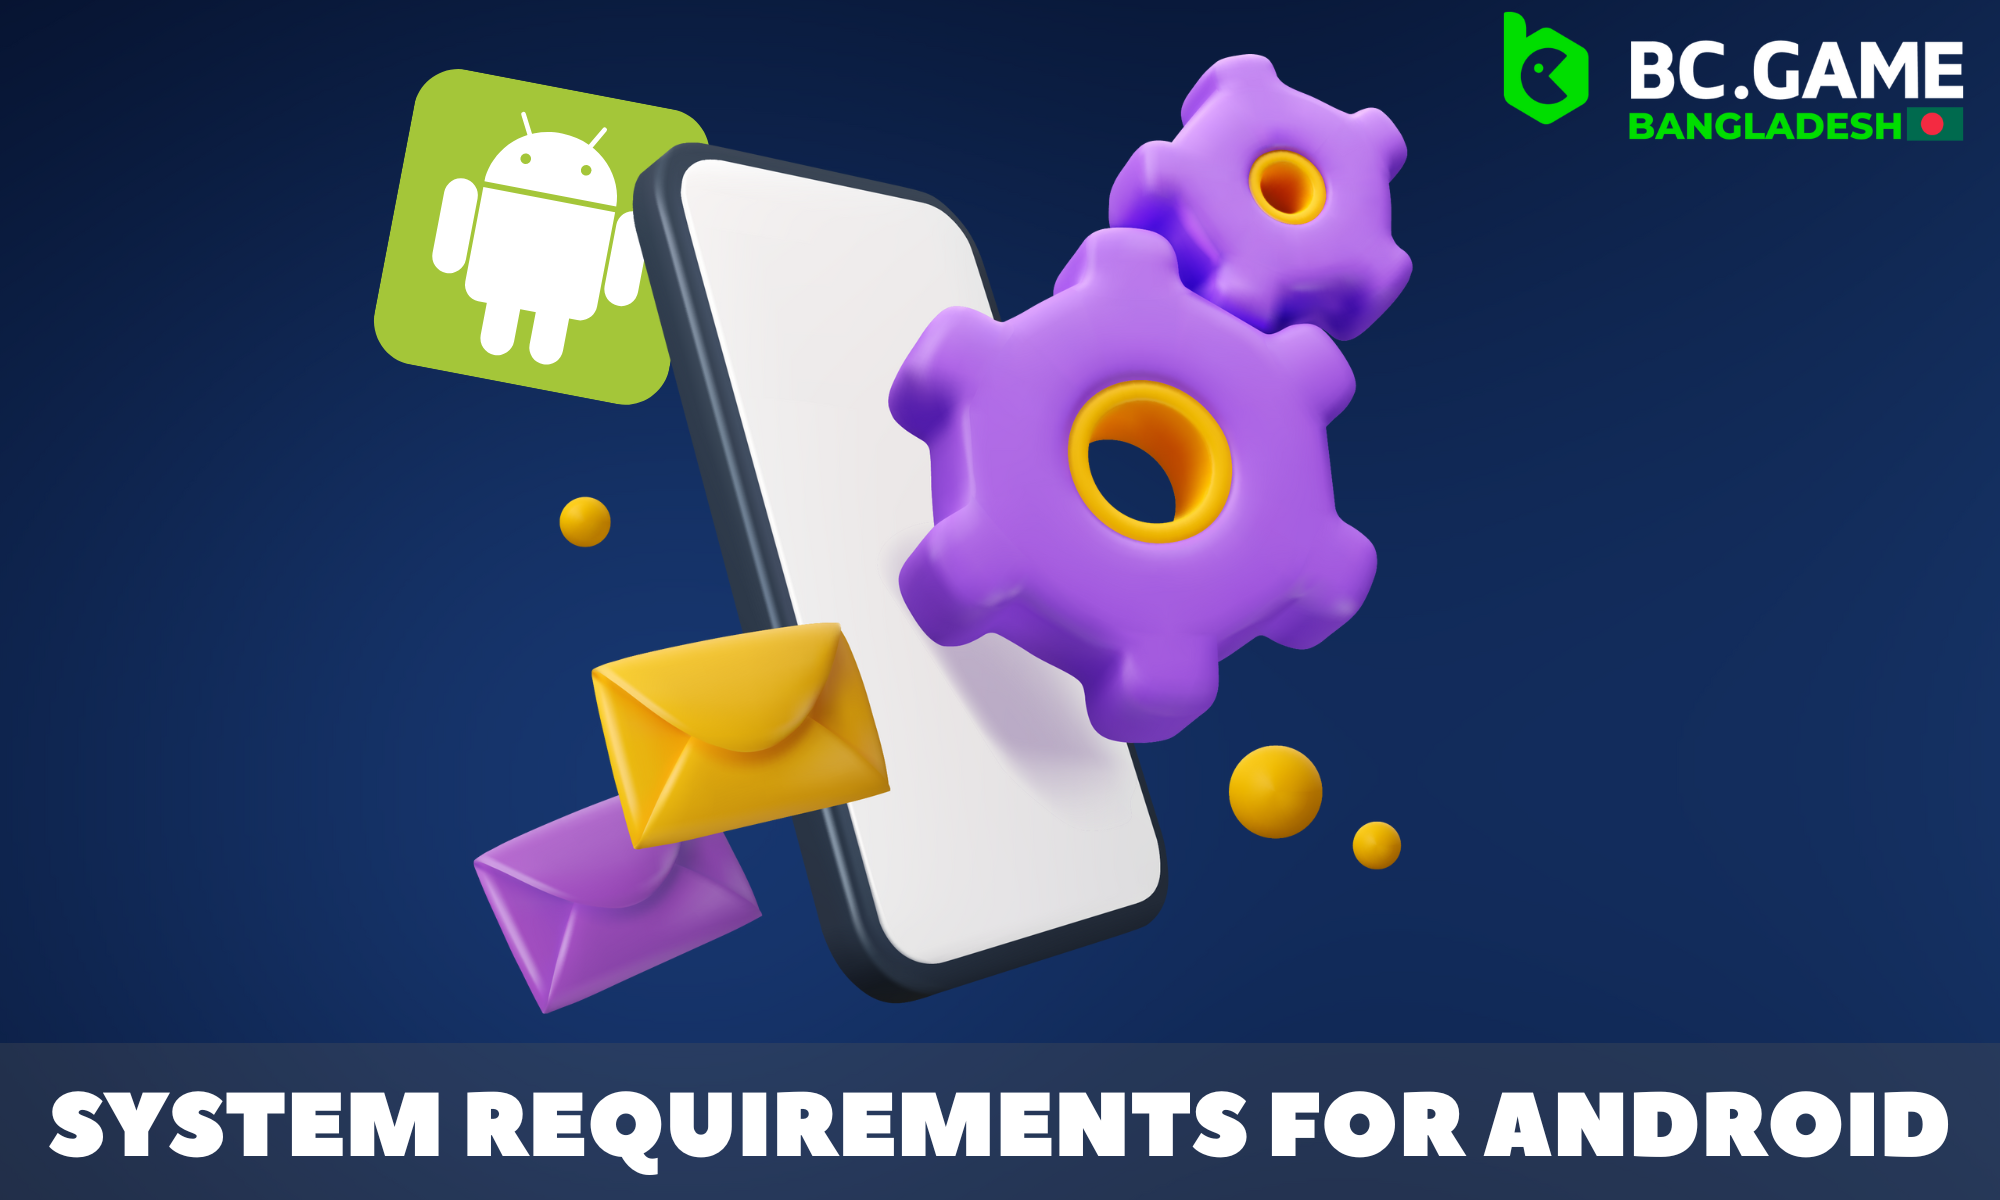 Overview of BC Game system requirements for Android phones